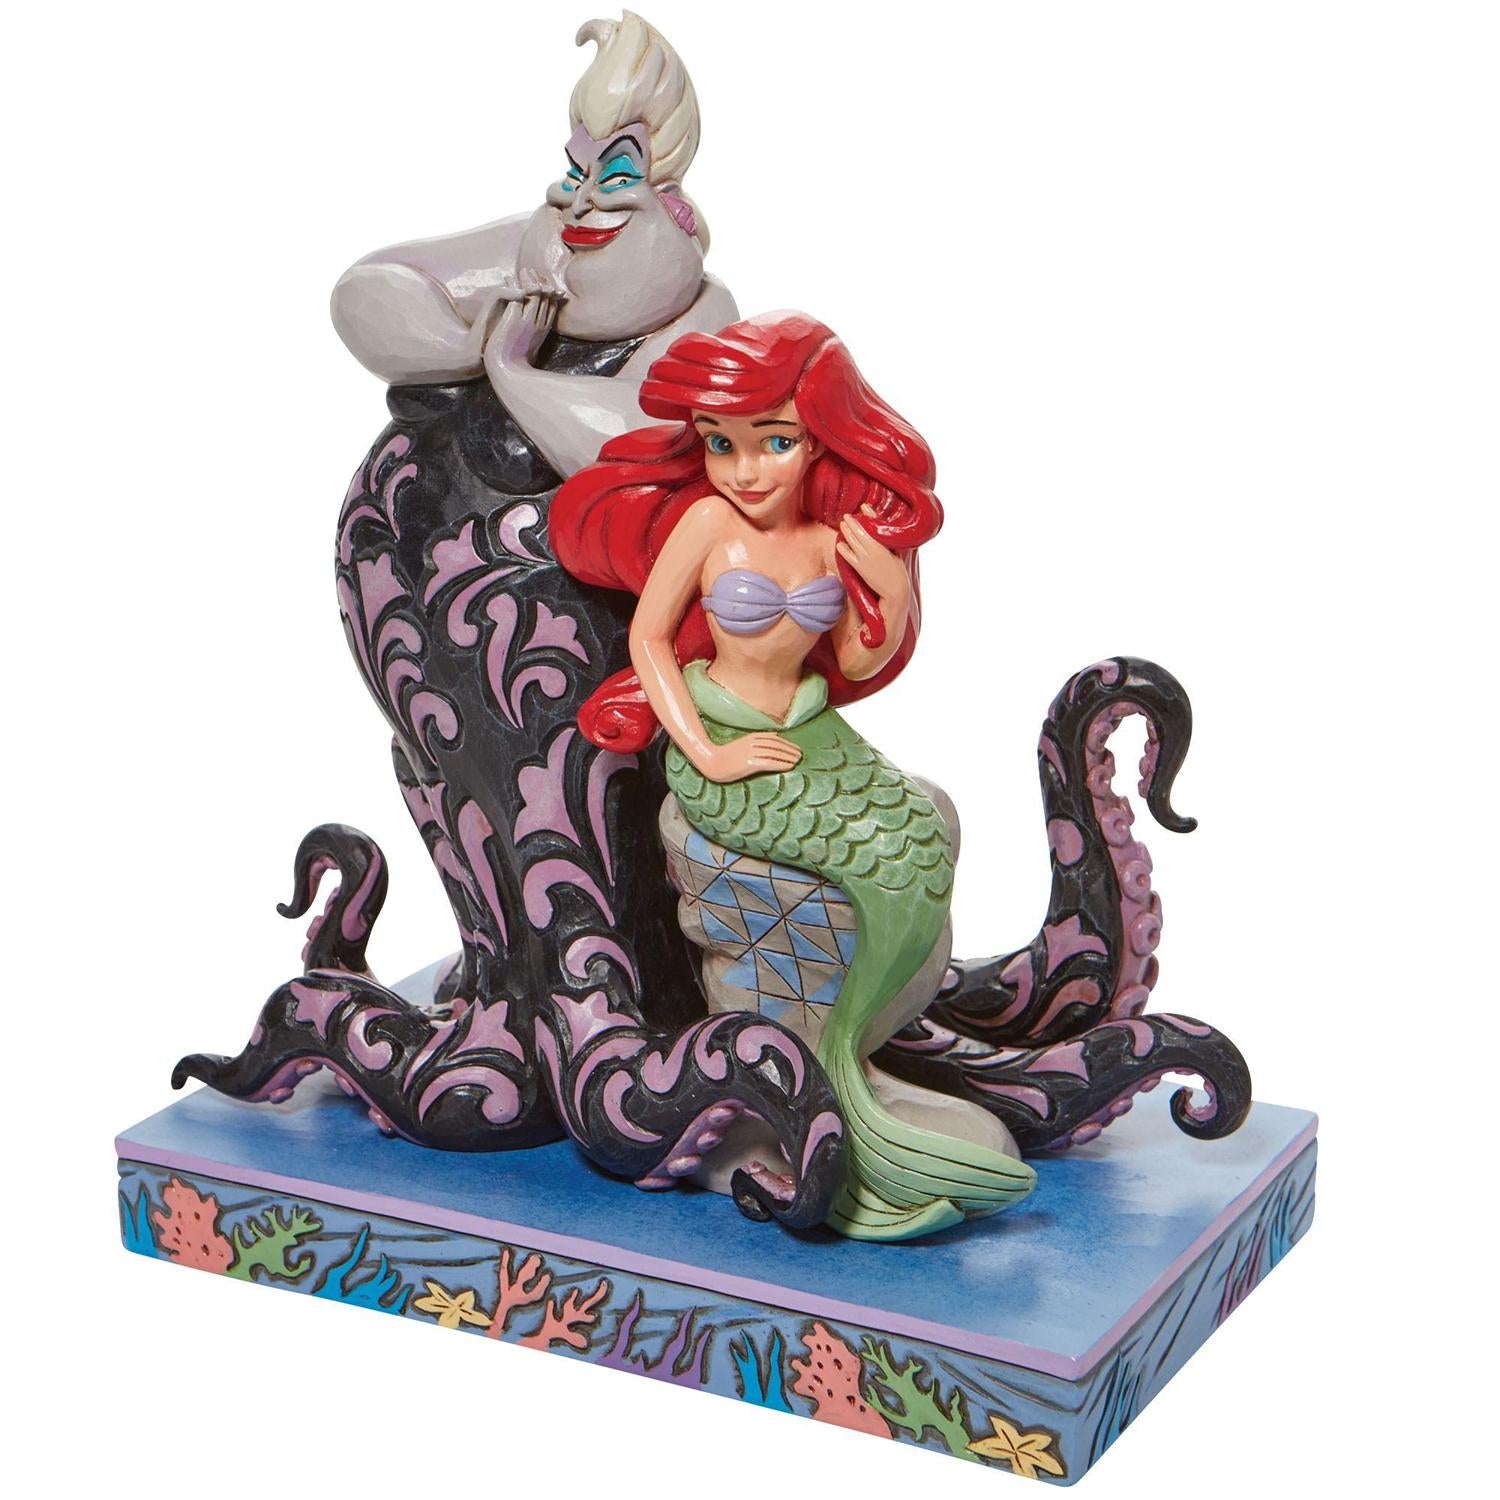 Ariel and Ursula - side view